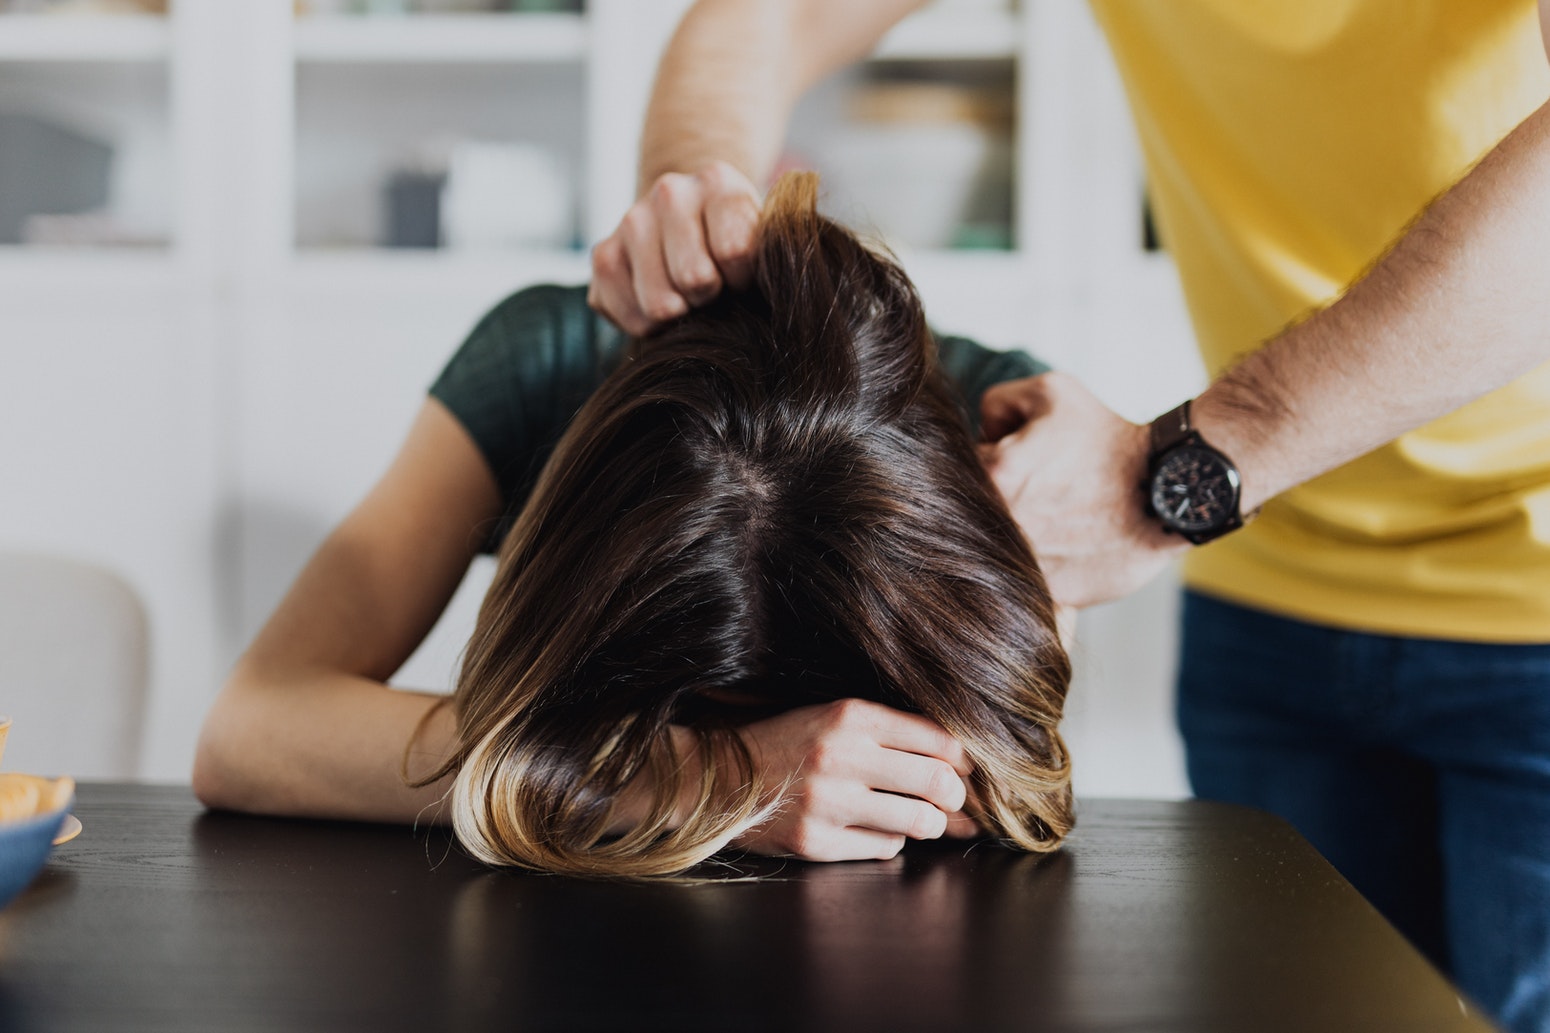 woman's head pressed down on table by a man indoors